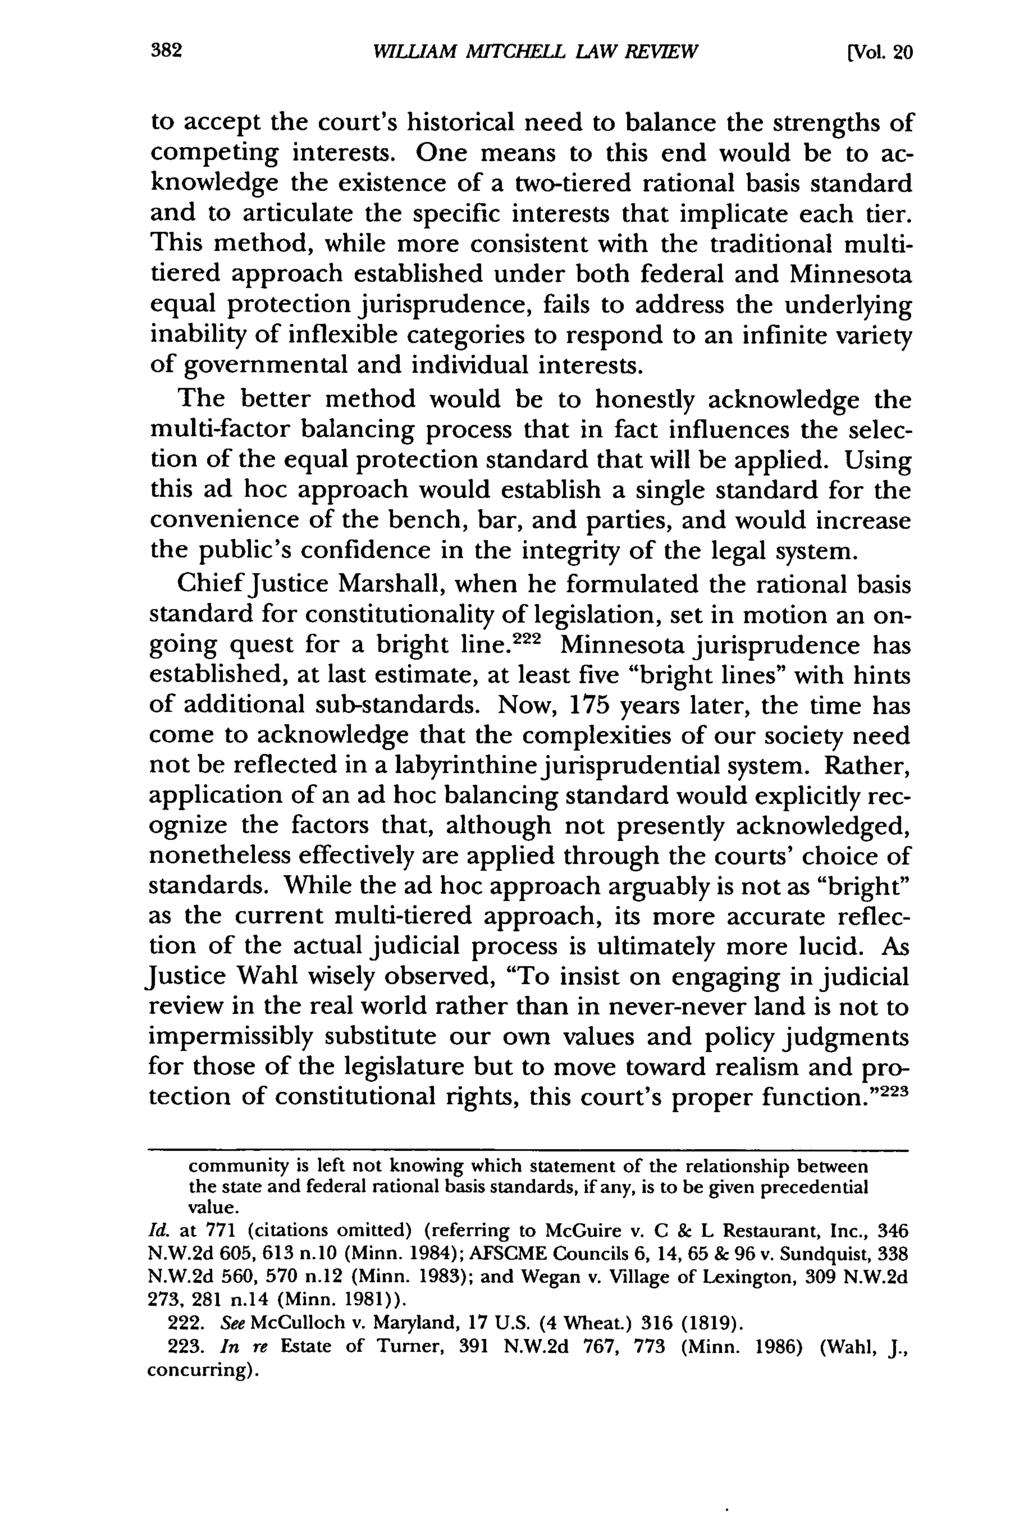 William Mitchell WILLIAM Law Review, MITCHEL Vol. 20, LAW Iss. 2 [1994], REVIEW Art. 5 [Vol. 20 to accept the court's historical need to balance the strengths of competing interests.